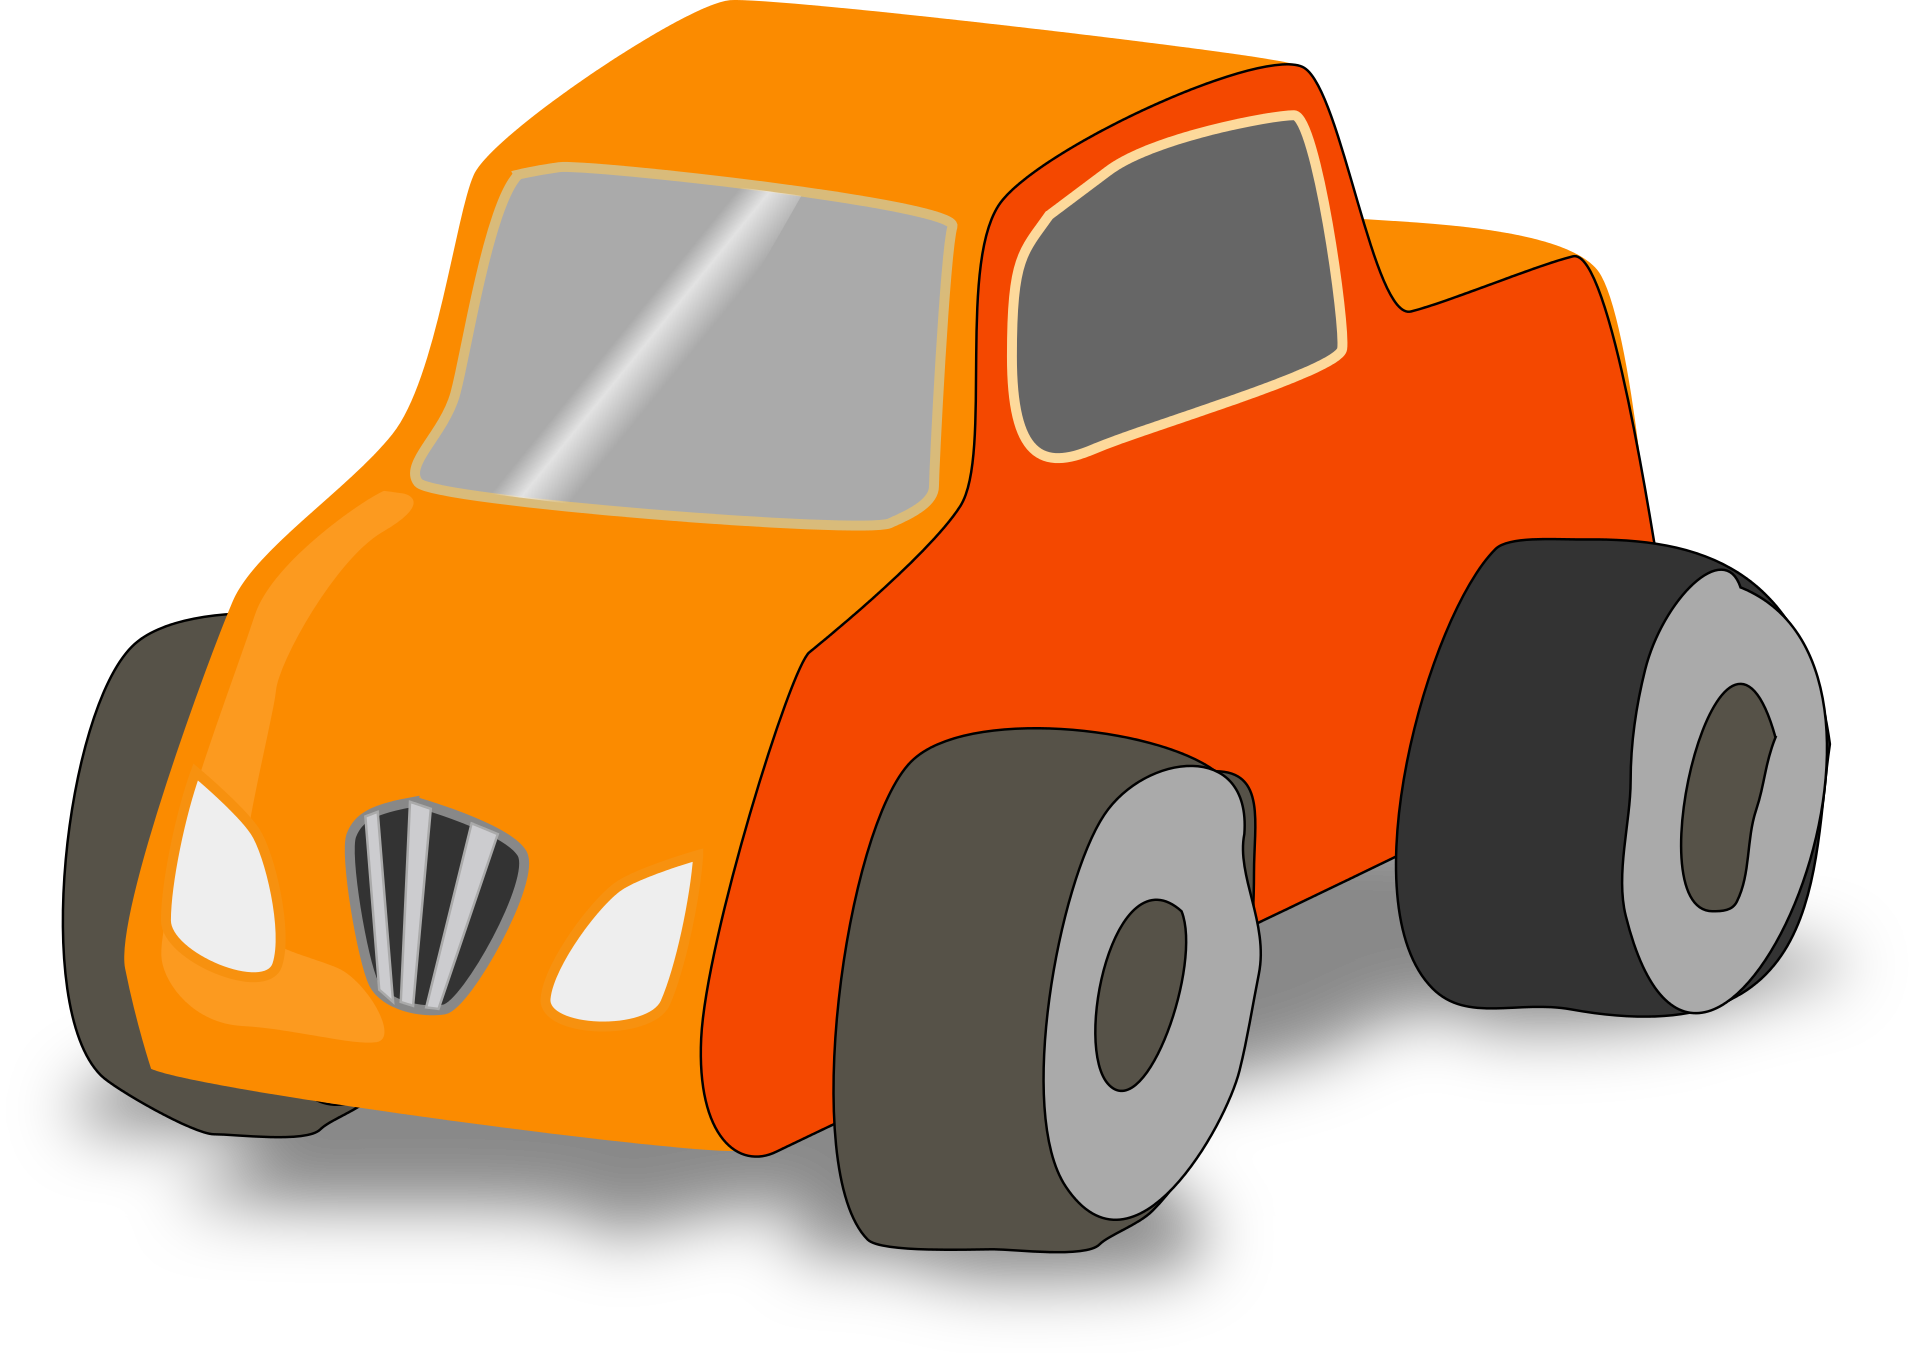 Toy Truck drawing free image download